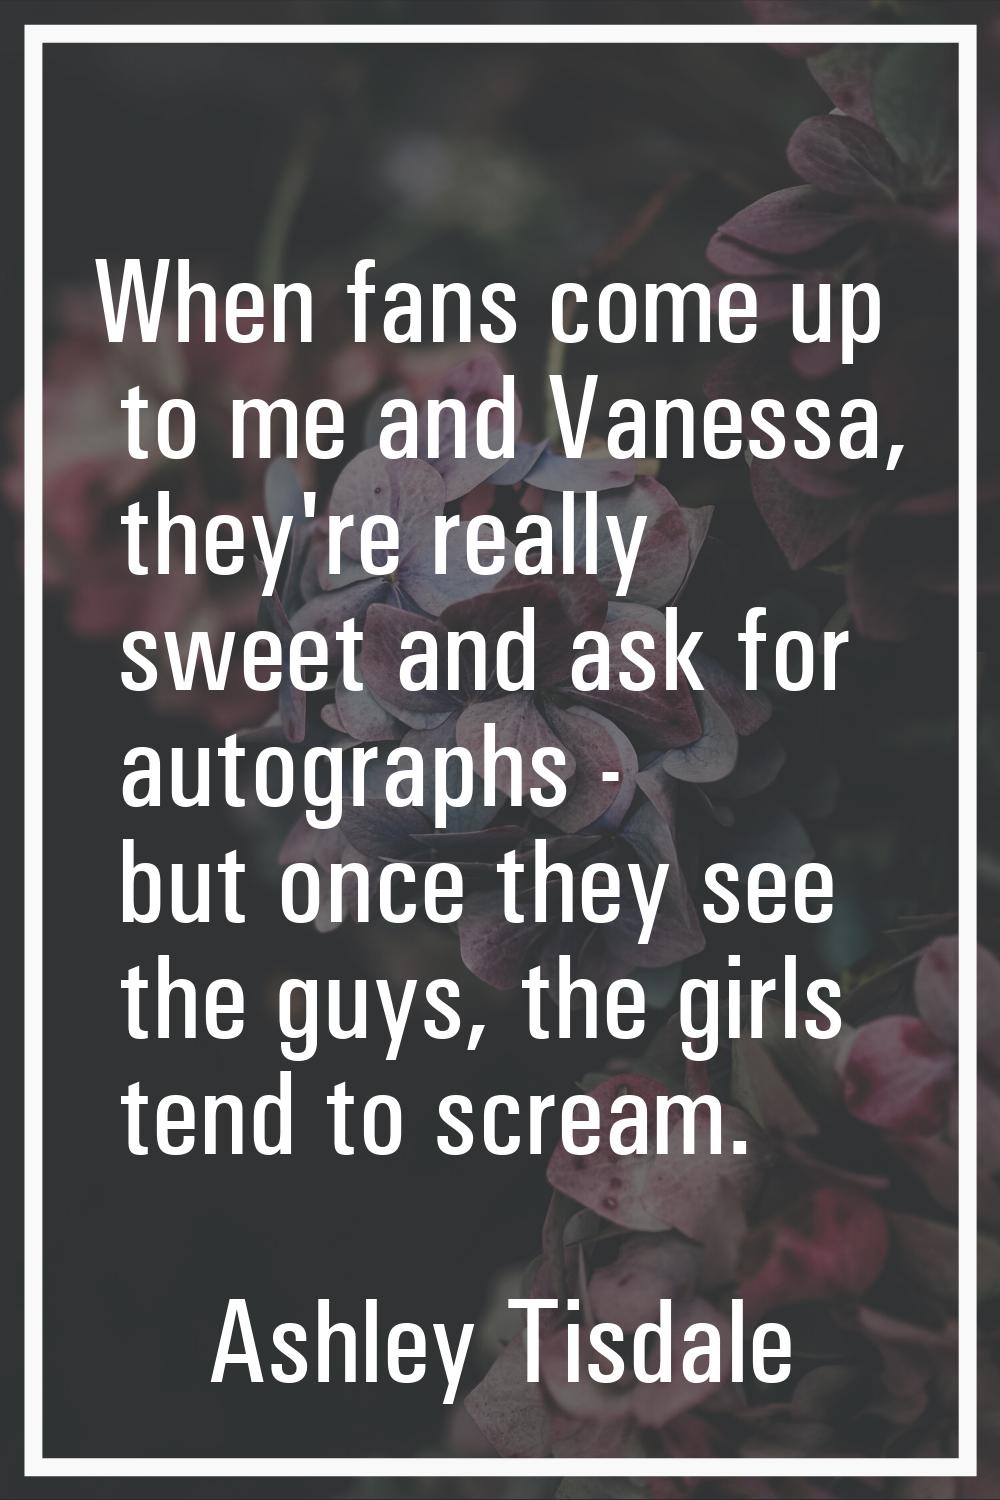 When fans come up to me and Vanessa, they're really sweet and ask for autographs - but once they se